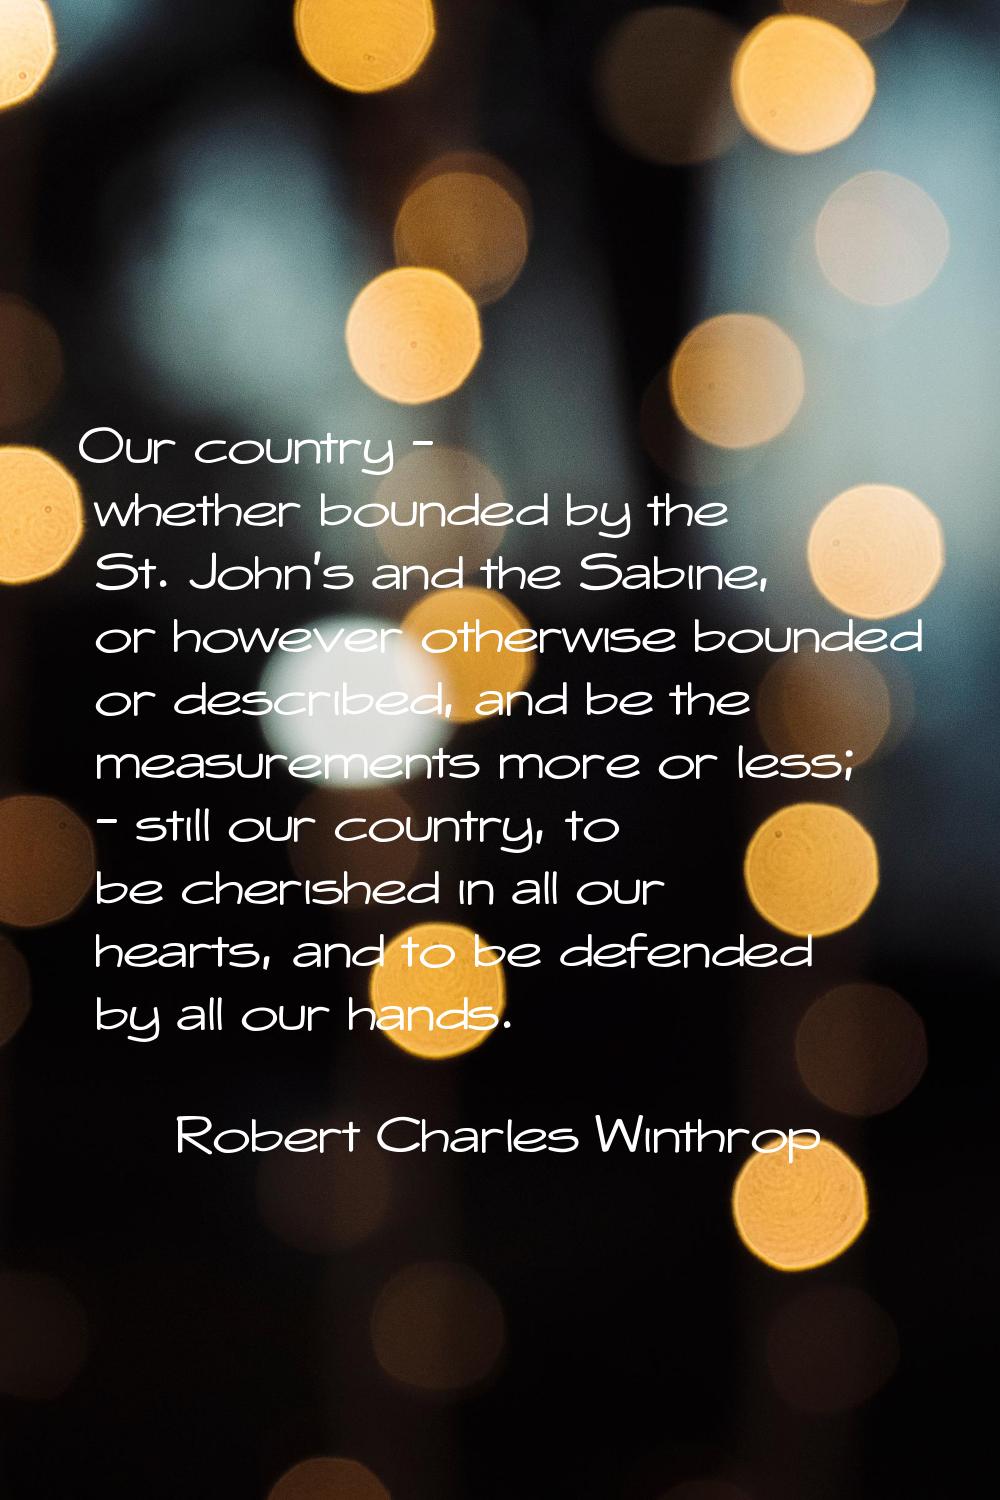 Our country - whether bounded by the St. John's and the Sabine, or however otherwise bounded or des